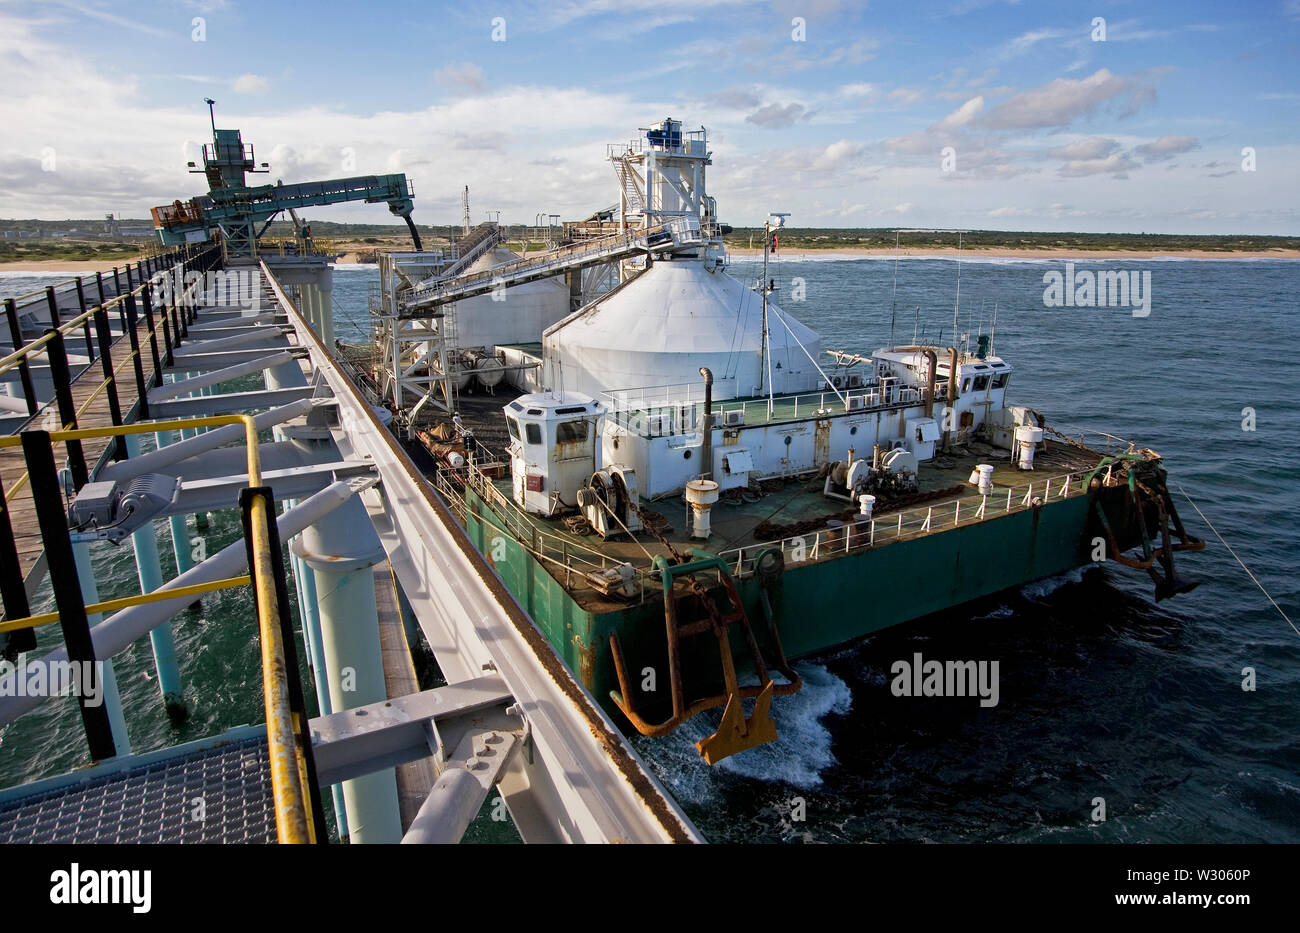 Mining, managing & transporting of titanium mineral sands. Port operations with barge loading & marine jetty work before transhipping product to OGV. Stock Photo